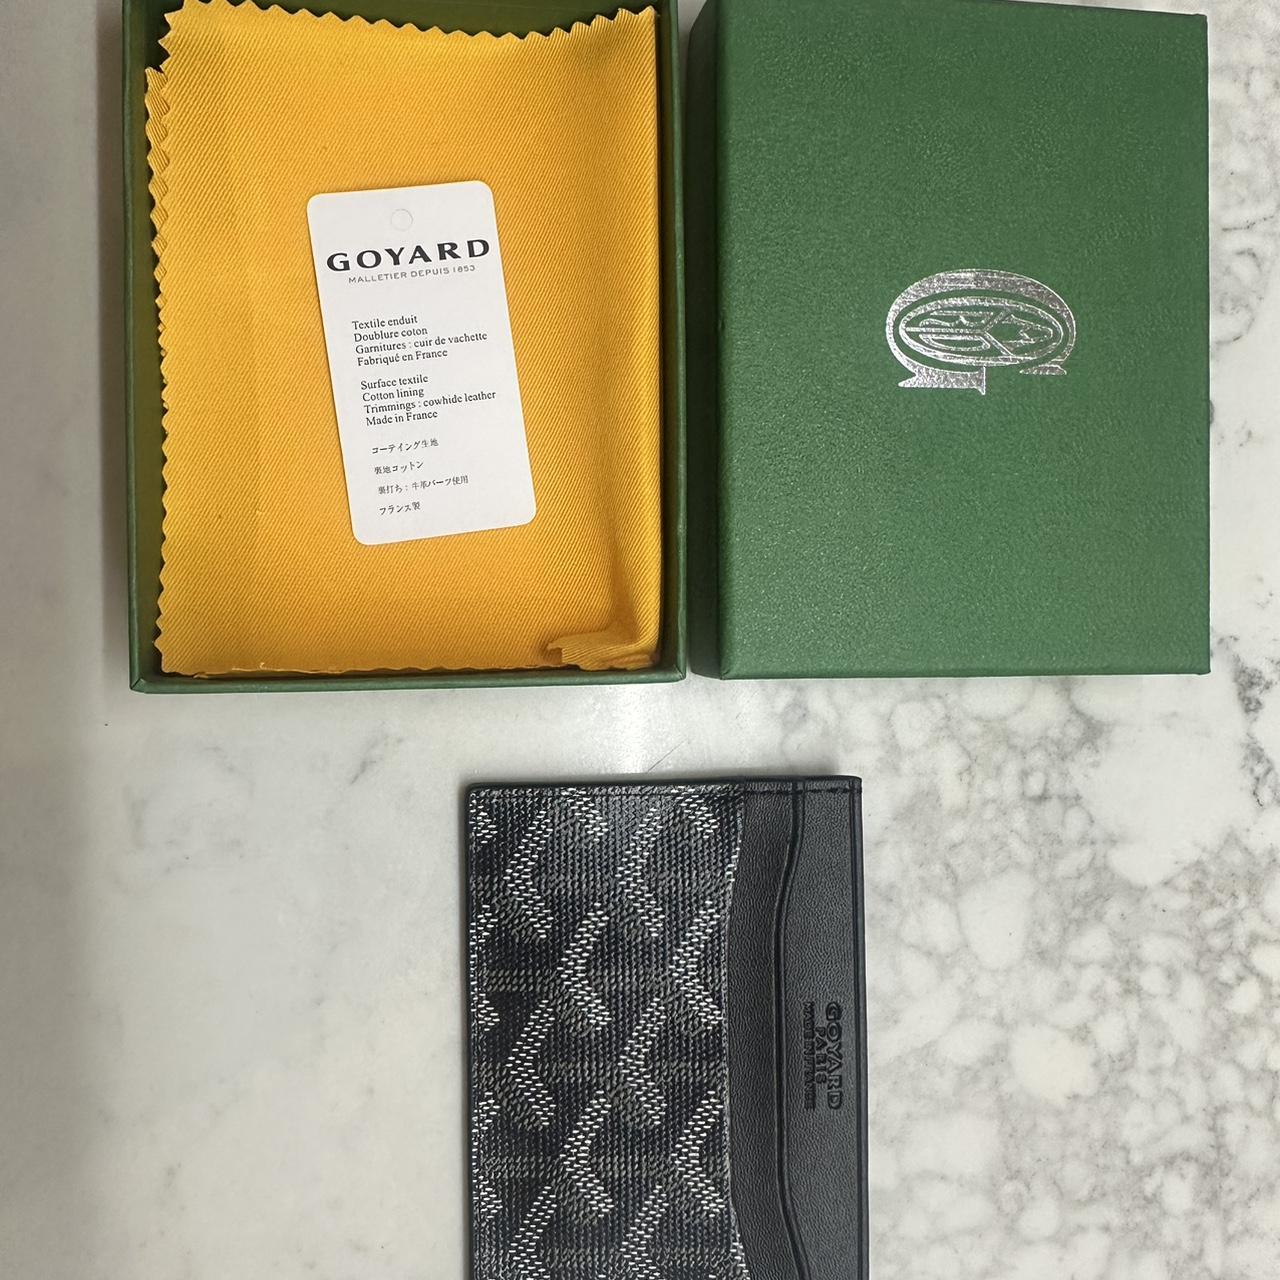 GOYARD CARD HOLDER 1:1 Comes with box and ticket... - Depop